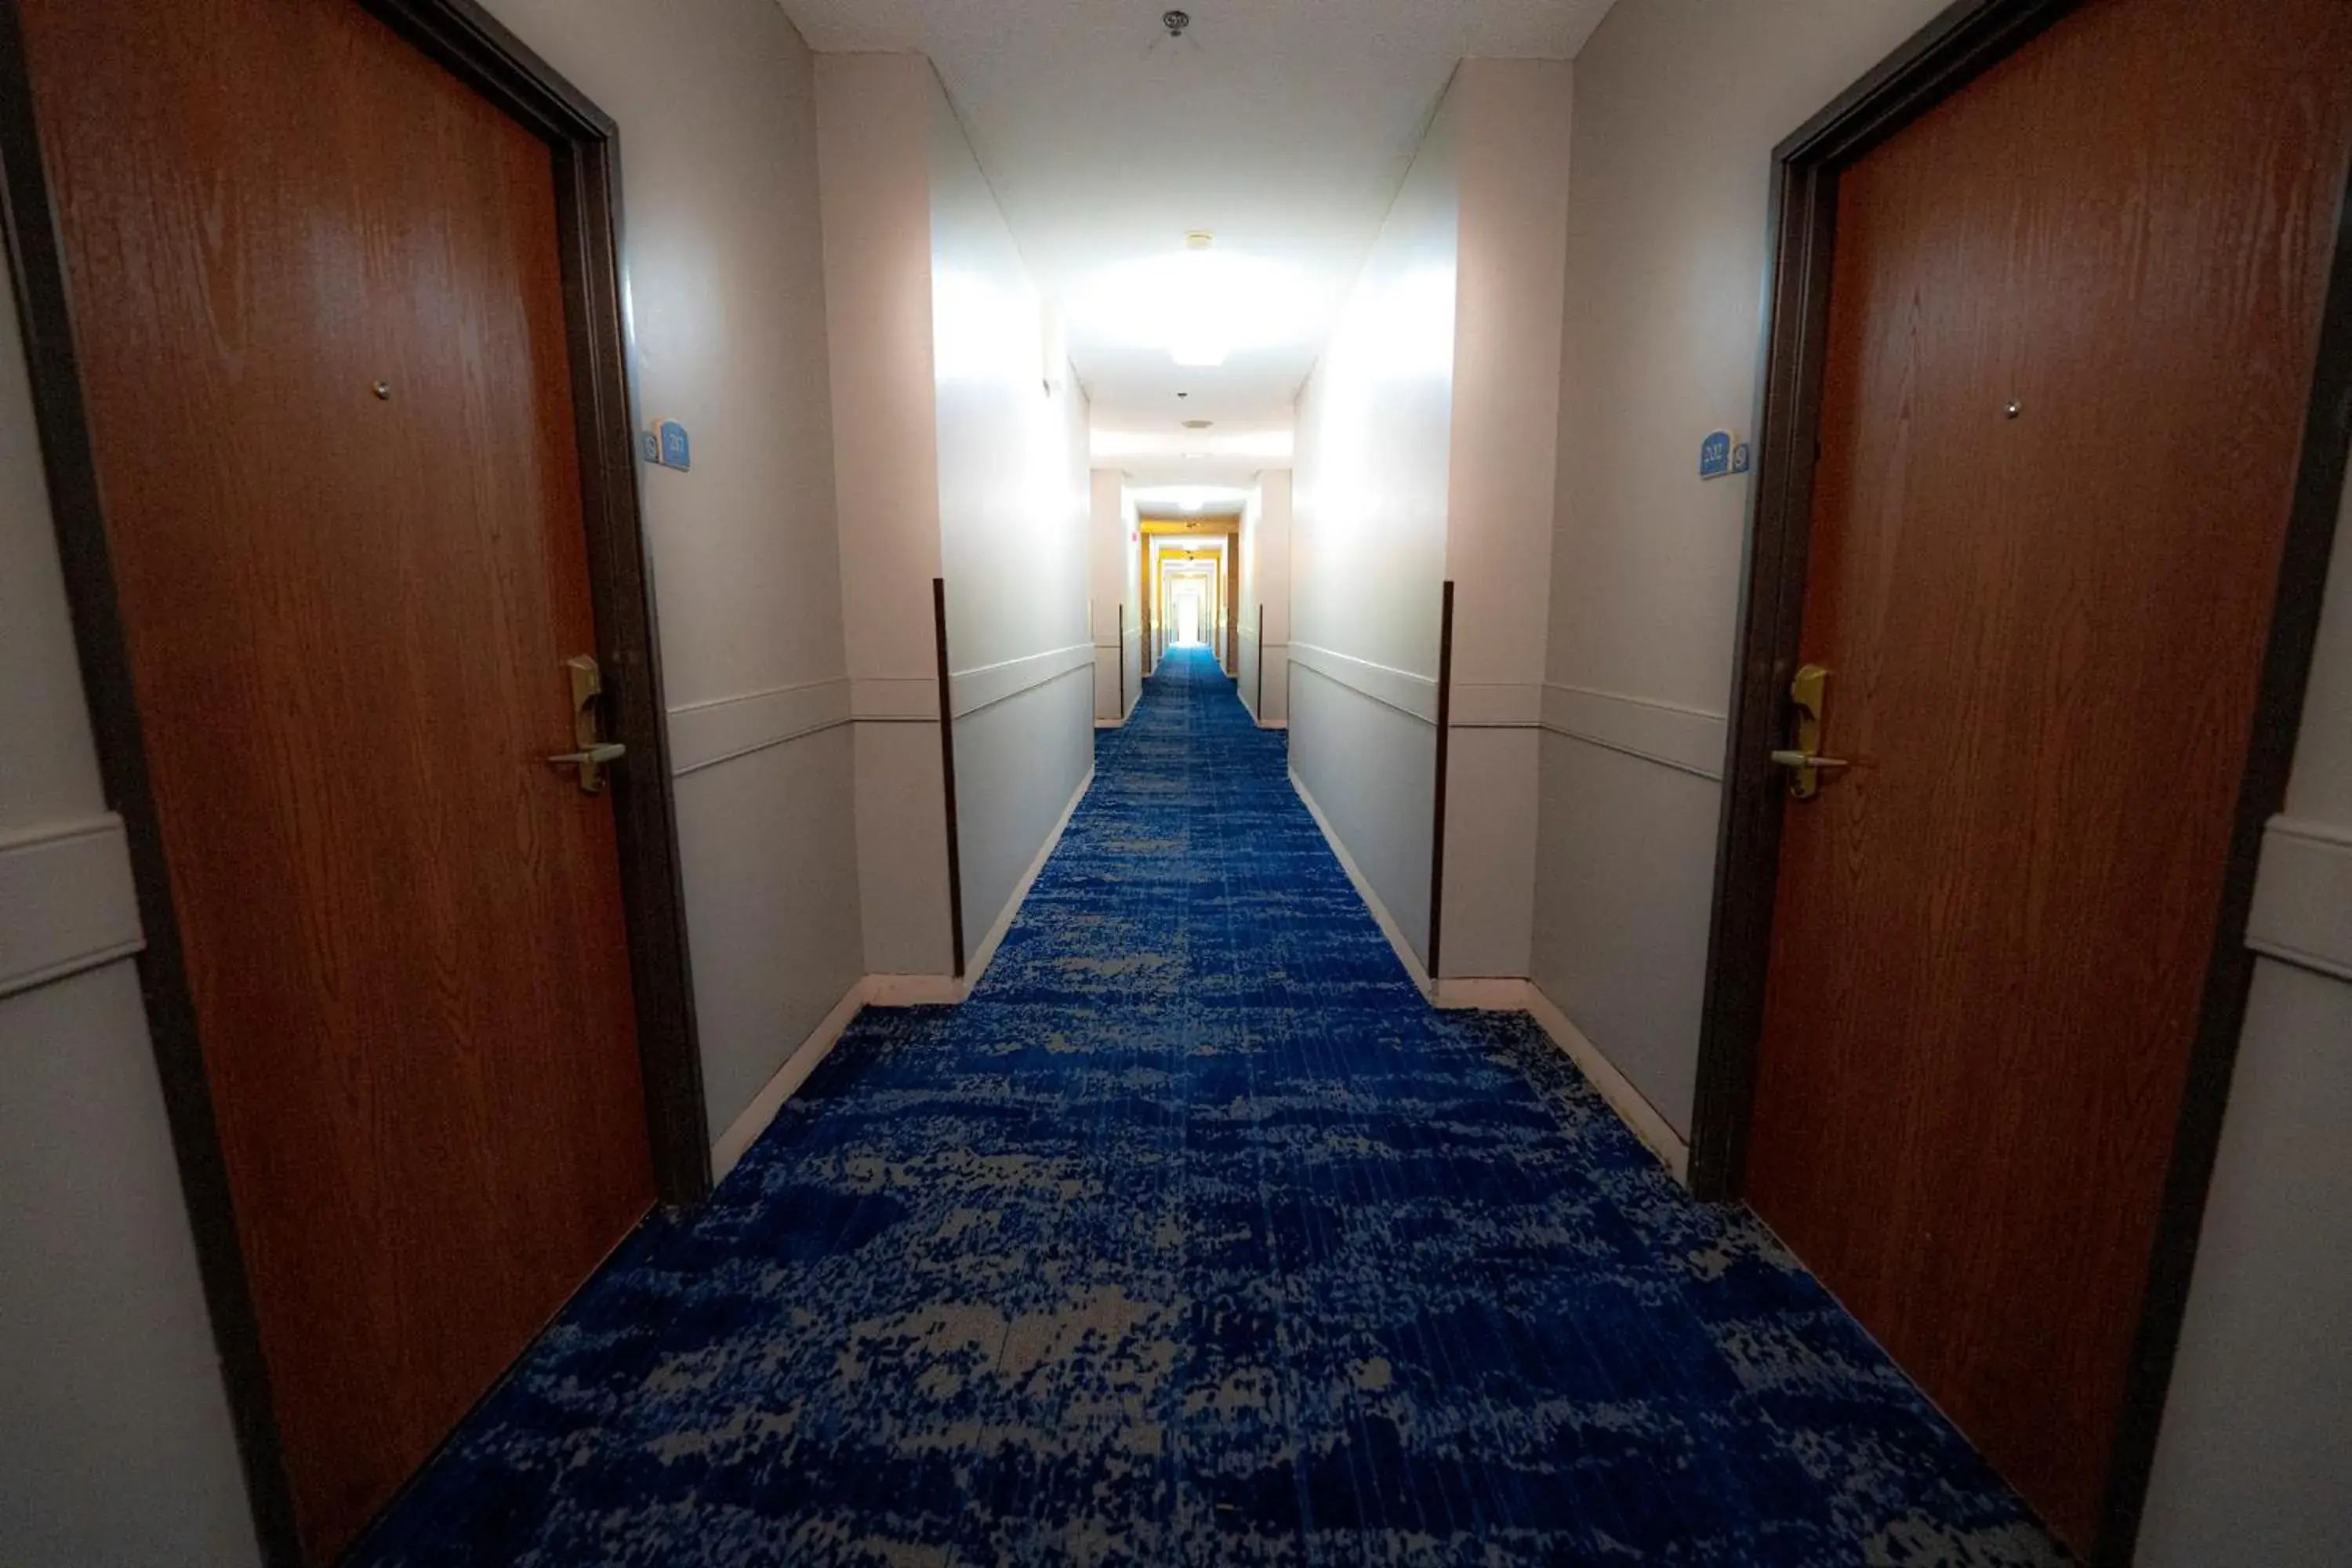 Lobby or reception in Quality Inn & Suites